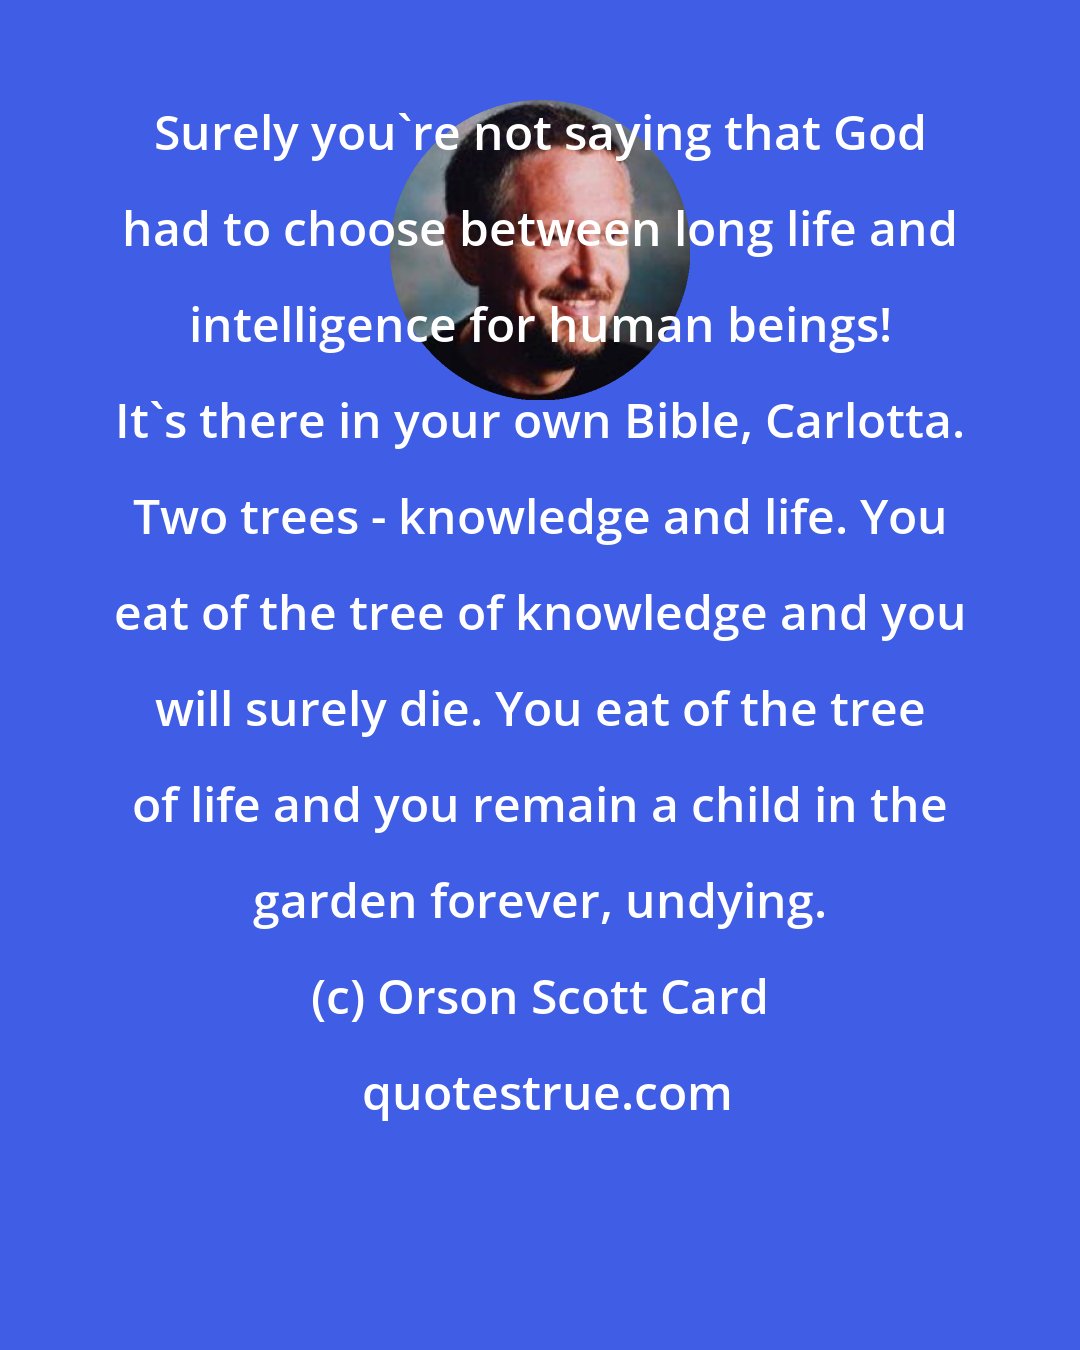 Orson Scott Card: Surely you're not saying that God had to choose between long life and intelligence for human beings! It's there in your own Bible, Carlotta. Two trees - knowledge and life. You eat of the tree of knowledge and you will surely die. You eat of the tree of life and you remain a child in the garden forever, undying.